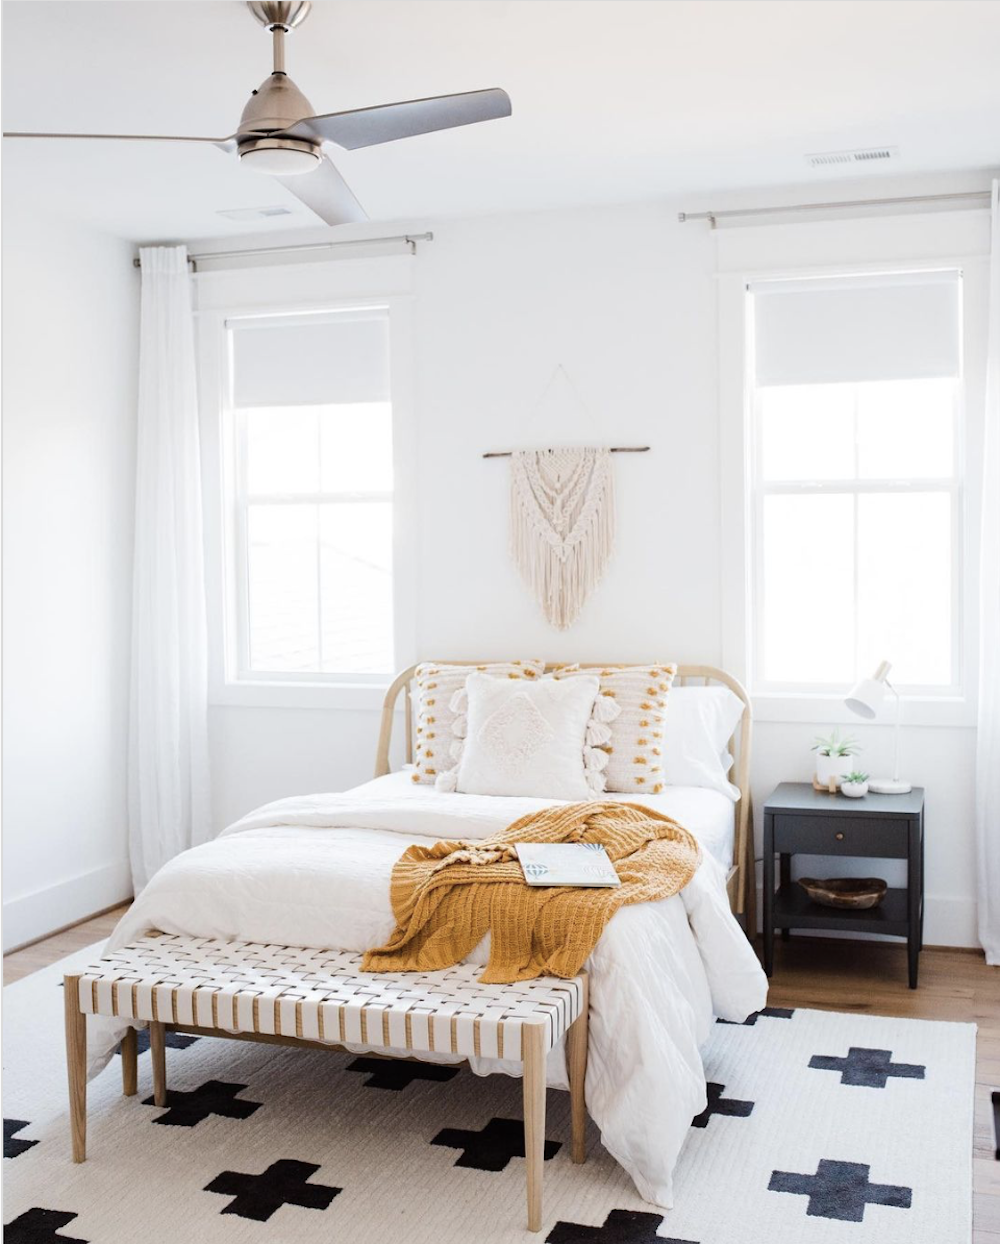 image of a white bedroom with a rattan bed, wooden bench, and black nightstand 